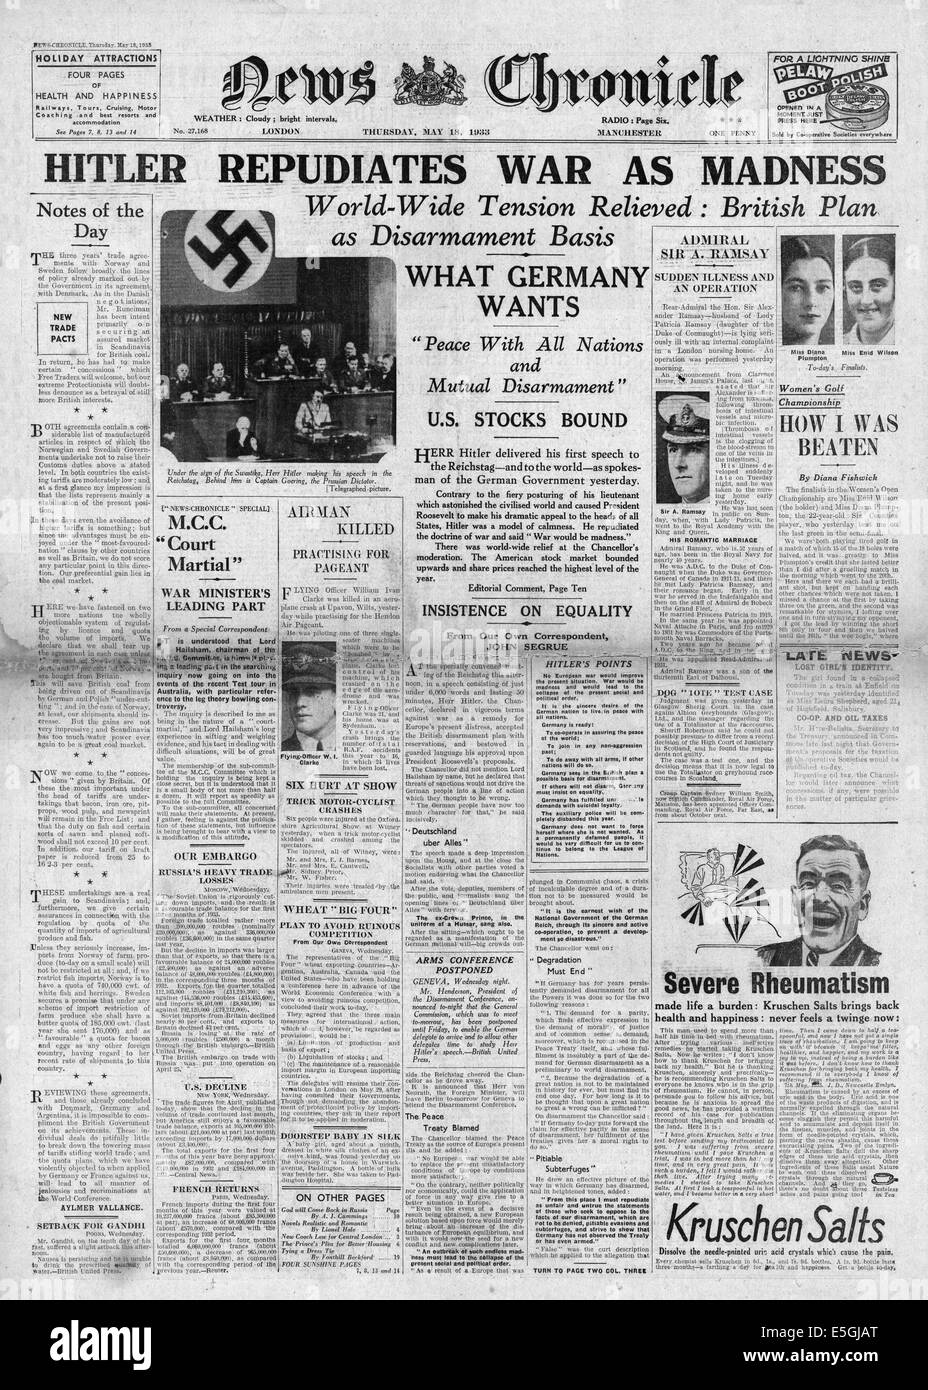 1933 News Chronicle front page reporting Adolf Hitler' first Reichstag speech as Chancellor repudiating war Stock Photo